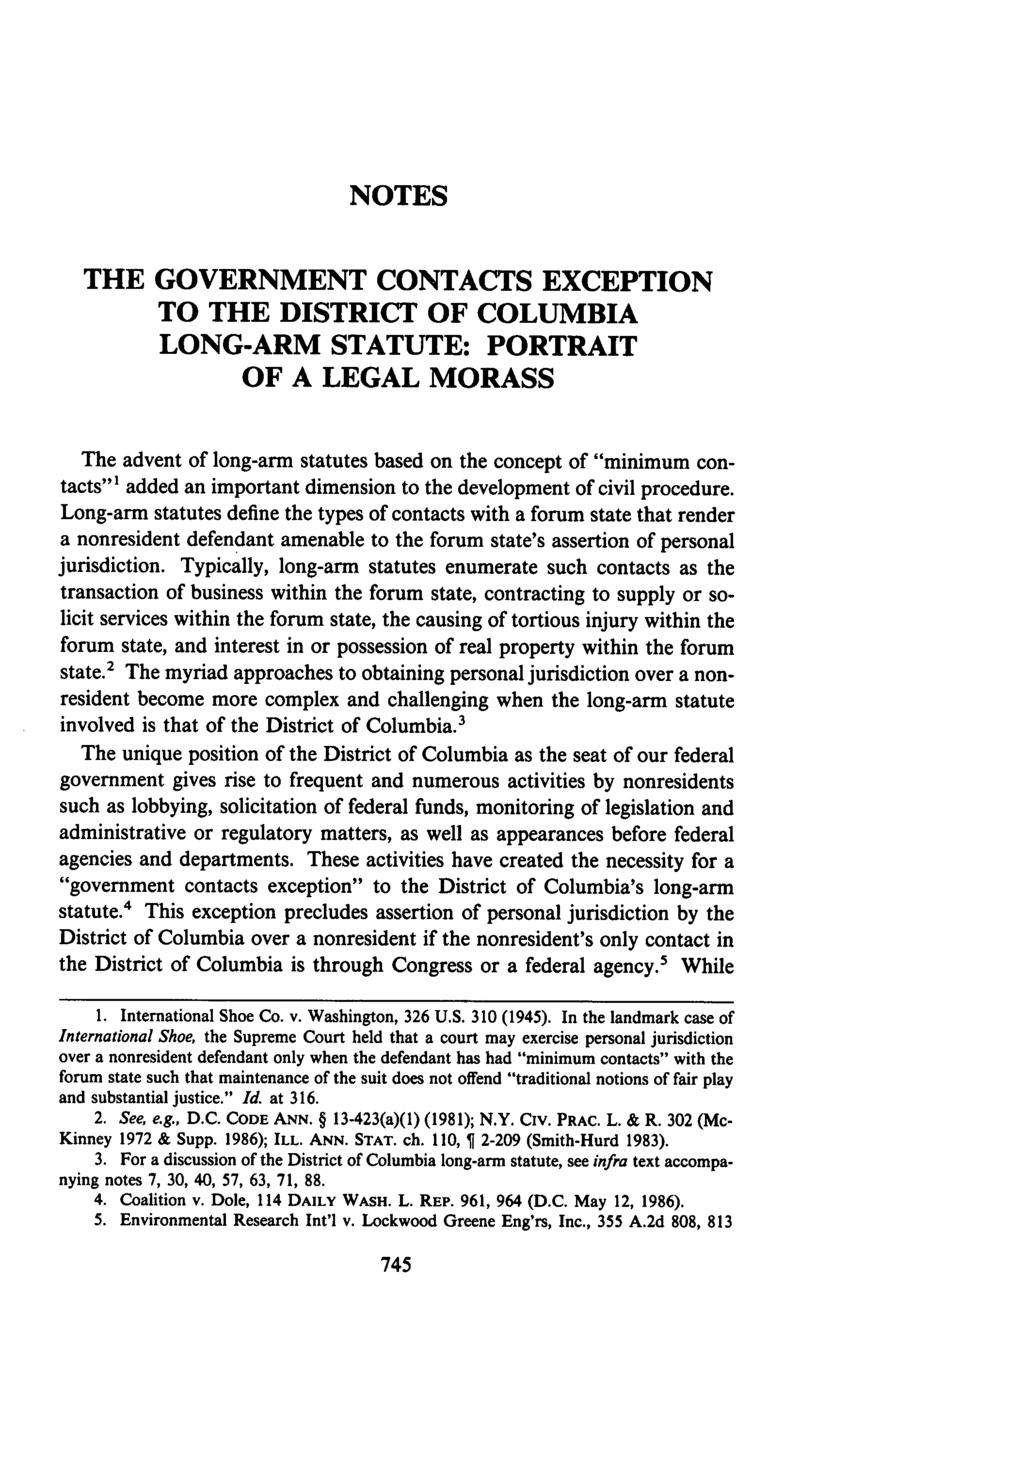 NOTES THE GOVERNMENT CONTACTS EXCEPTION TO THE DISTRICT OF COLUMBIA LONG-ARM STATUTE: PORTRAIT OF A LEGAL MORASS The advent of long-arm statutes based on the concept of "minimum contacts"' added an